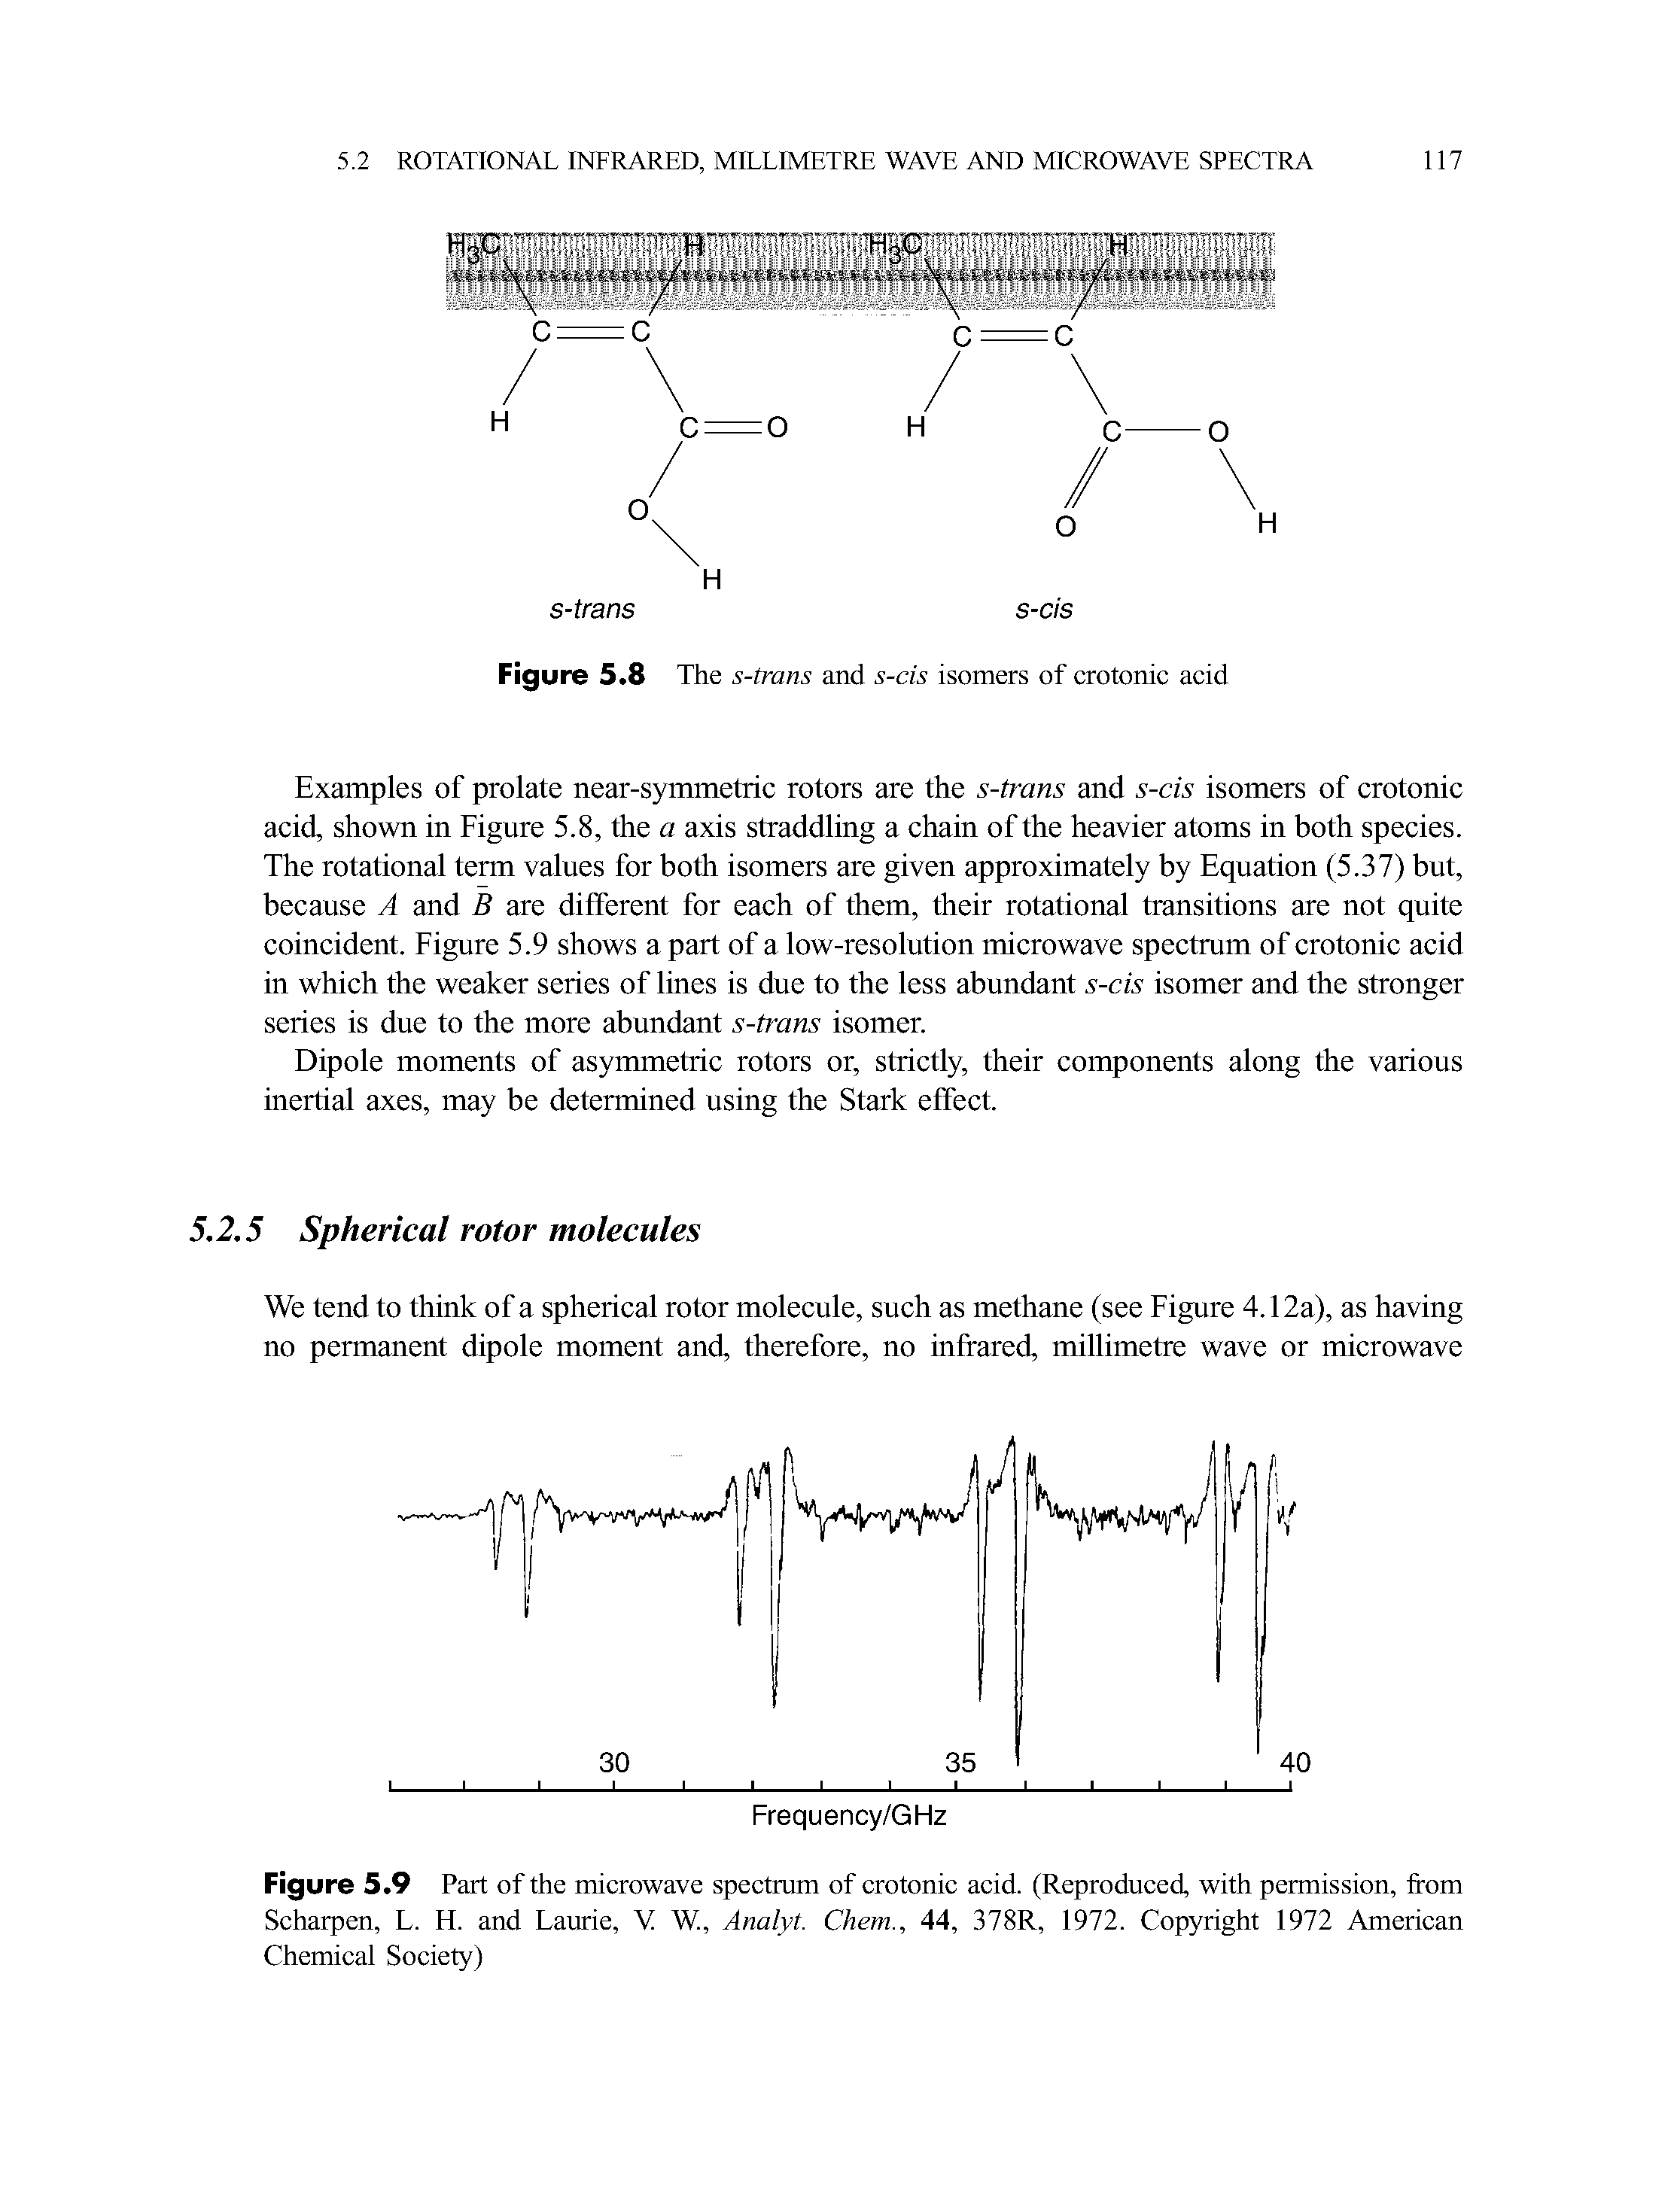 Figure 5.9 Part of the microwave spectmm of crotonic acid. (Reproduced, with permission, from Scharpen, L. H. and Laurie, V W., Analyt. Chem., 44, 378R, 1972. Copyright 1972 American Chemical Society)...